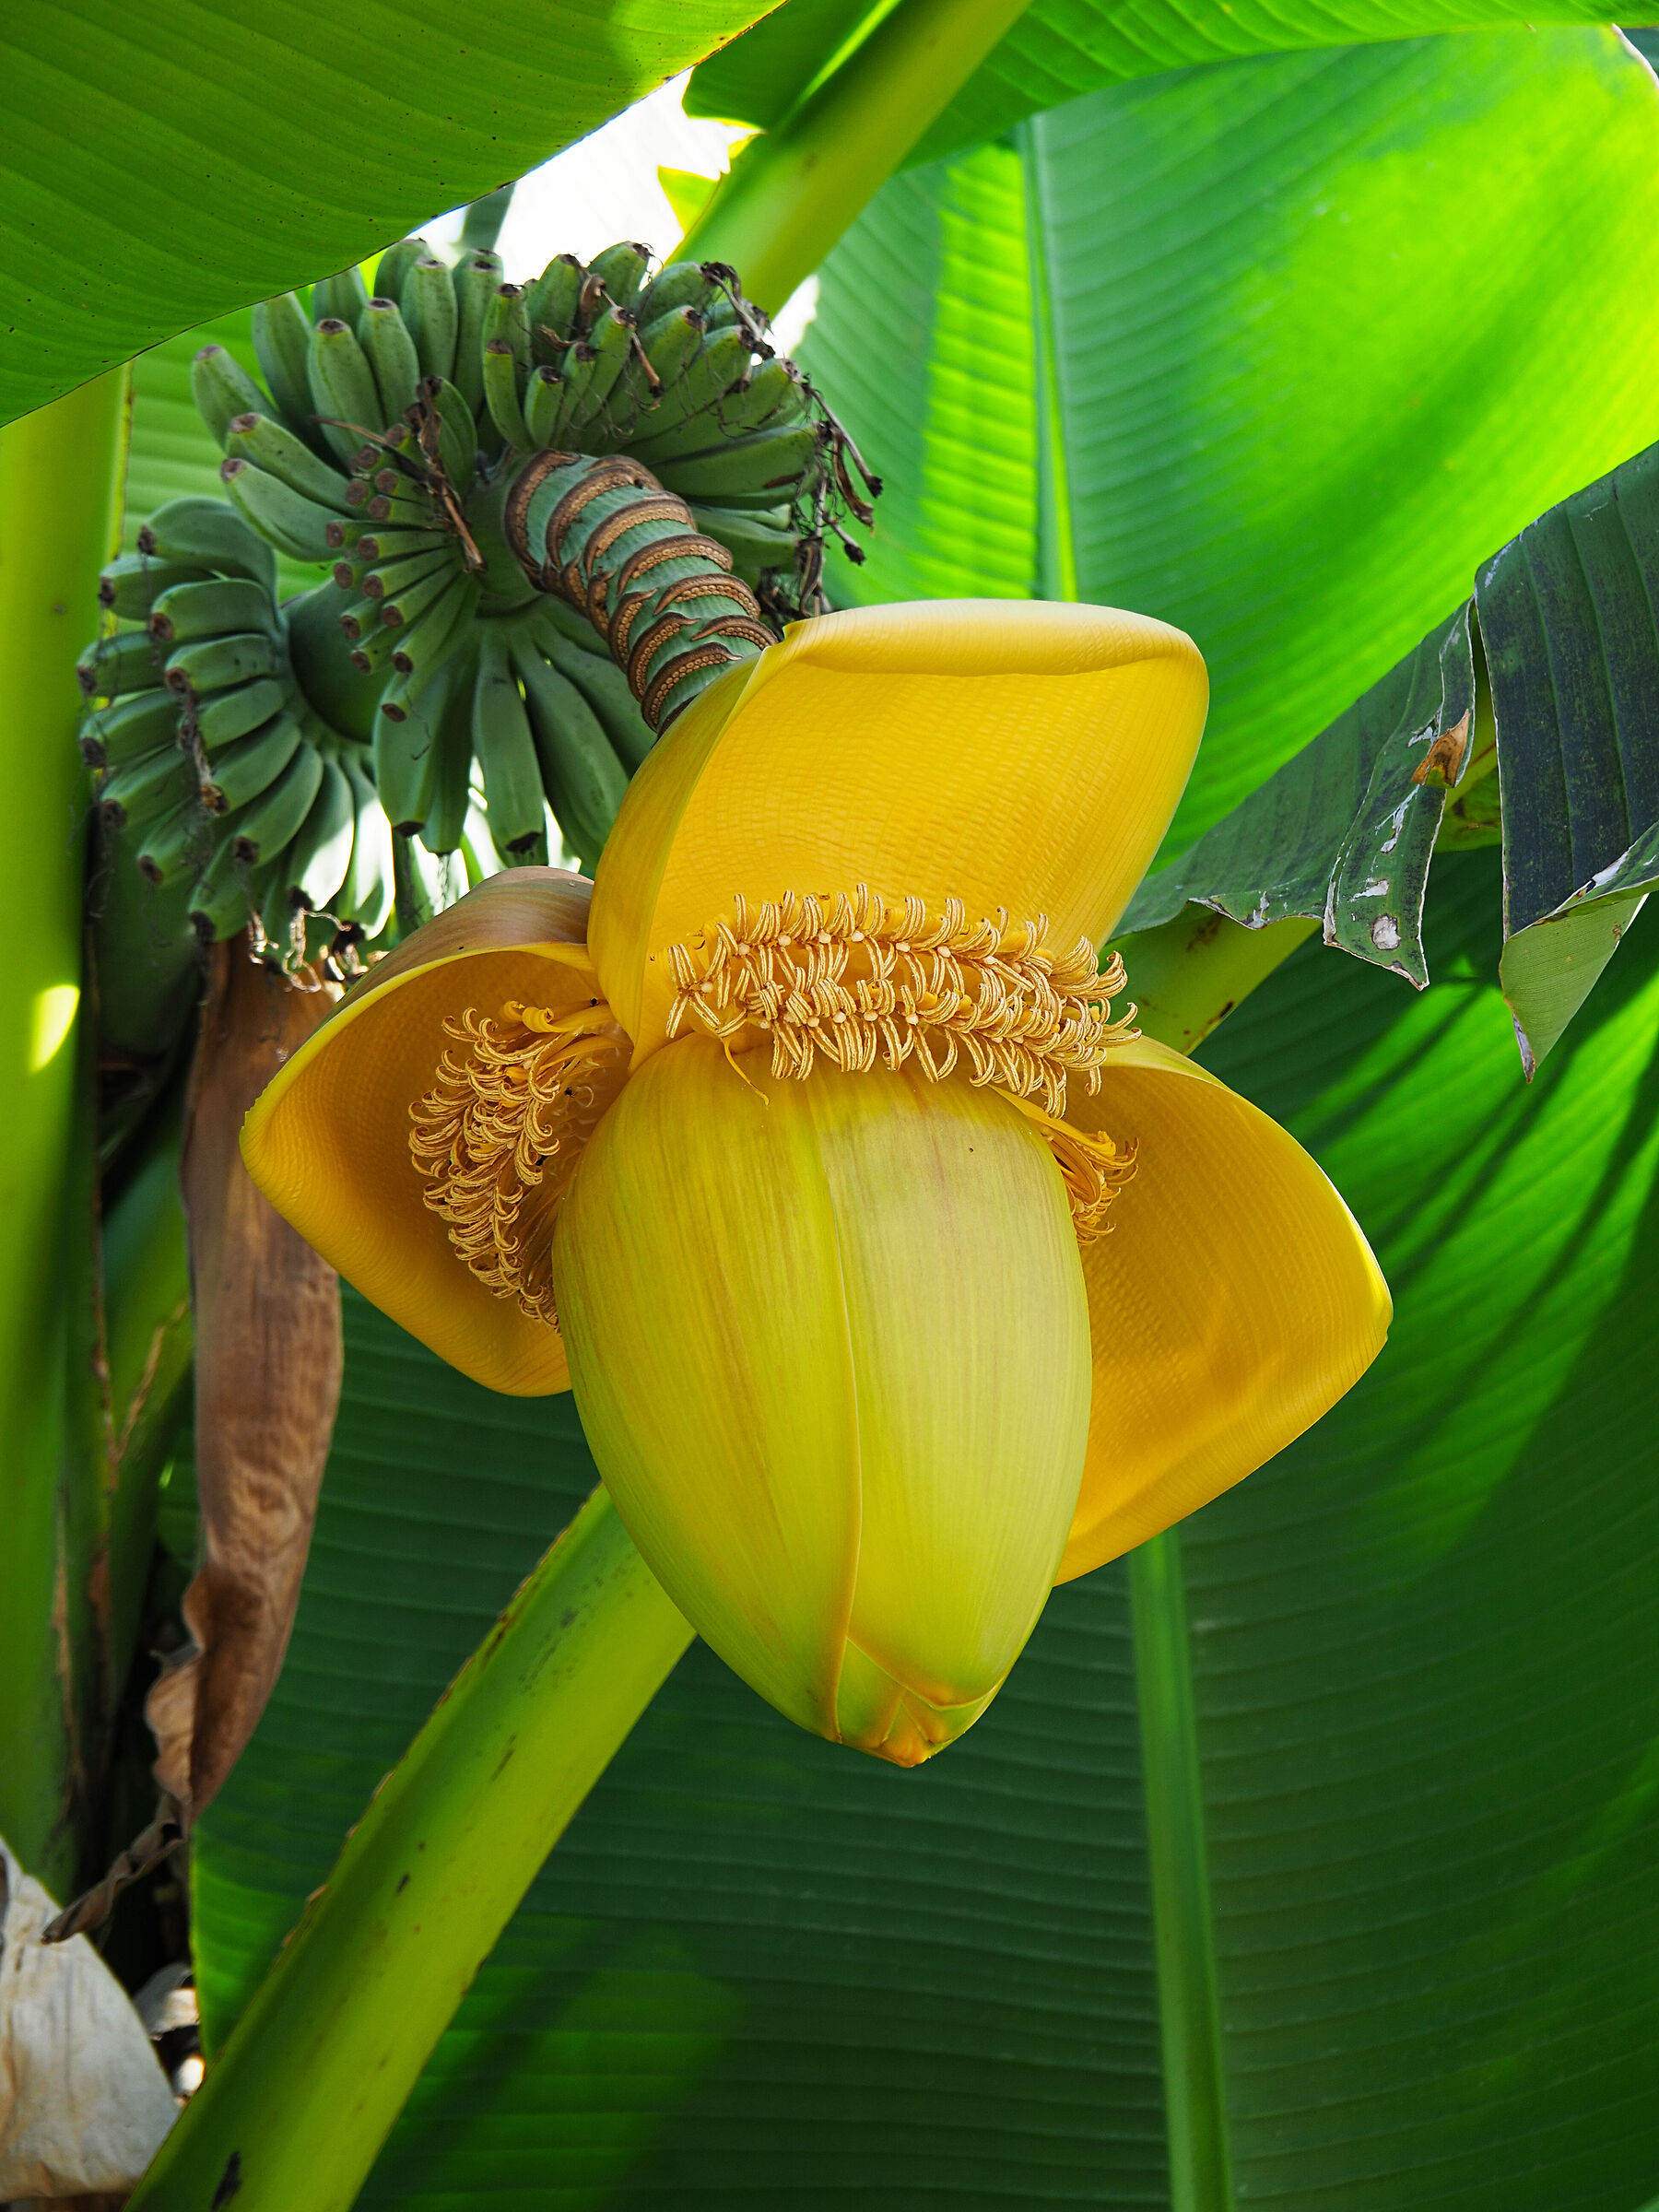 Banana flower and its fruits...